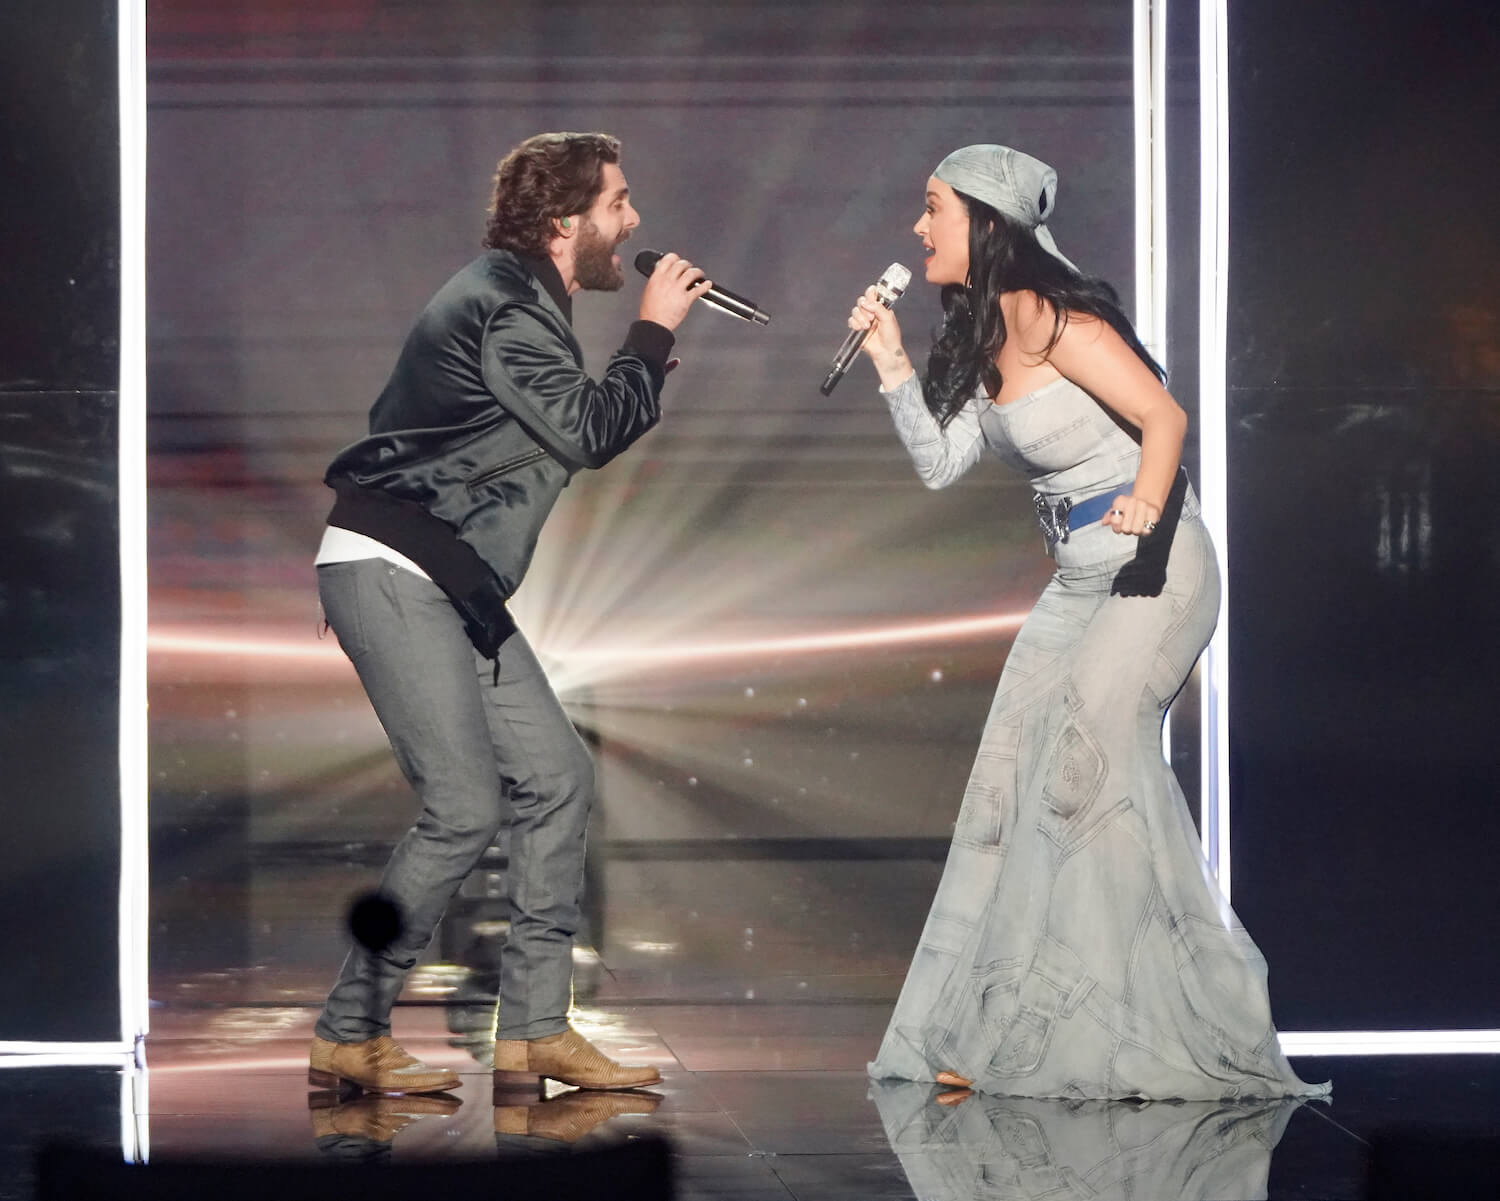 'American Idol' contestant Thomas Rhett from season 20 singing across from Katy Perry on stage